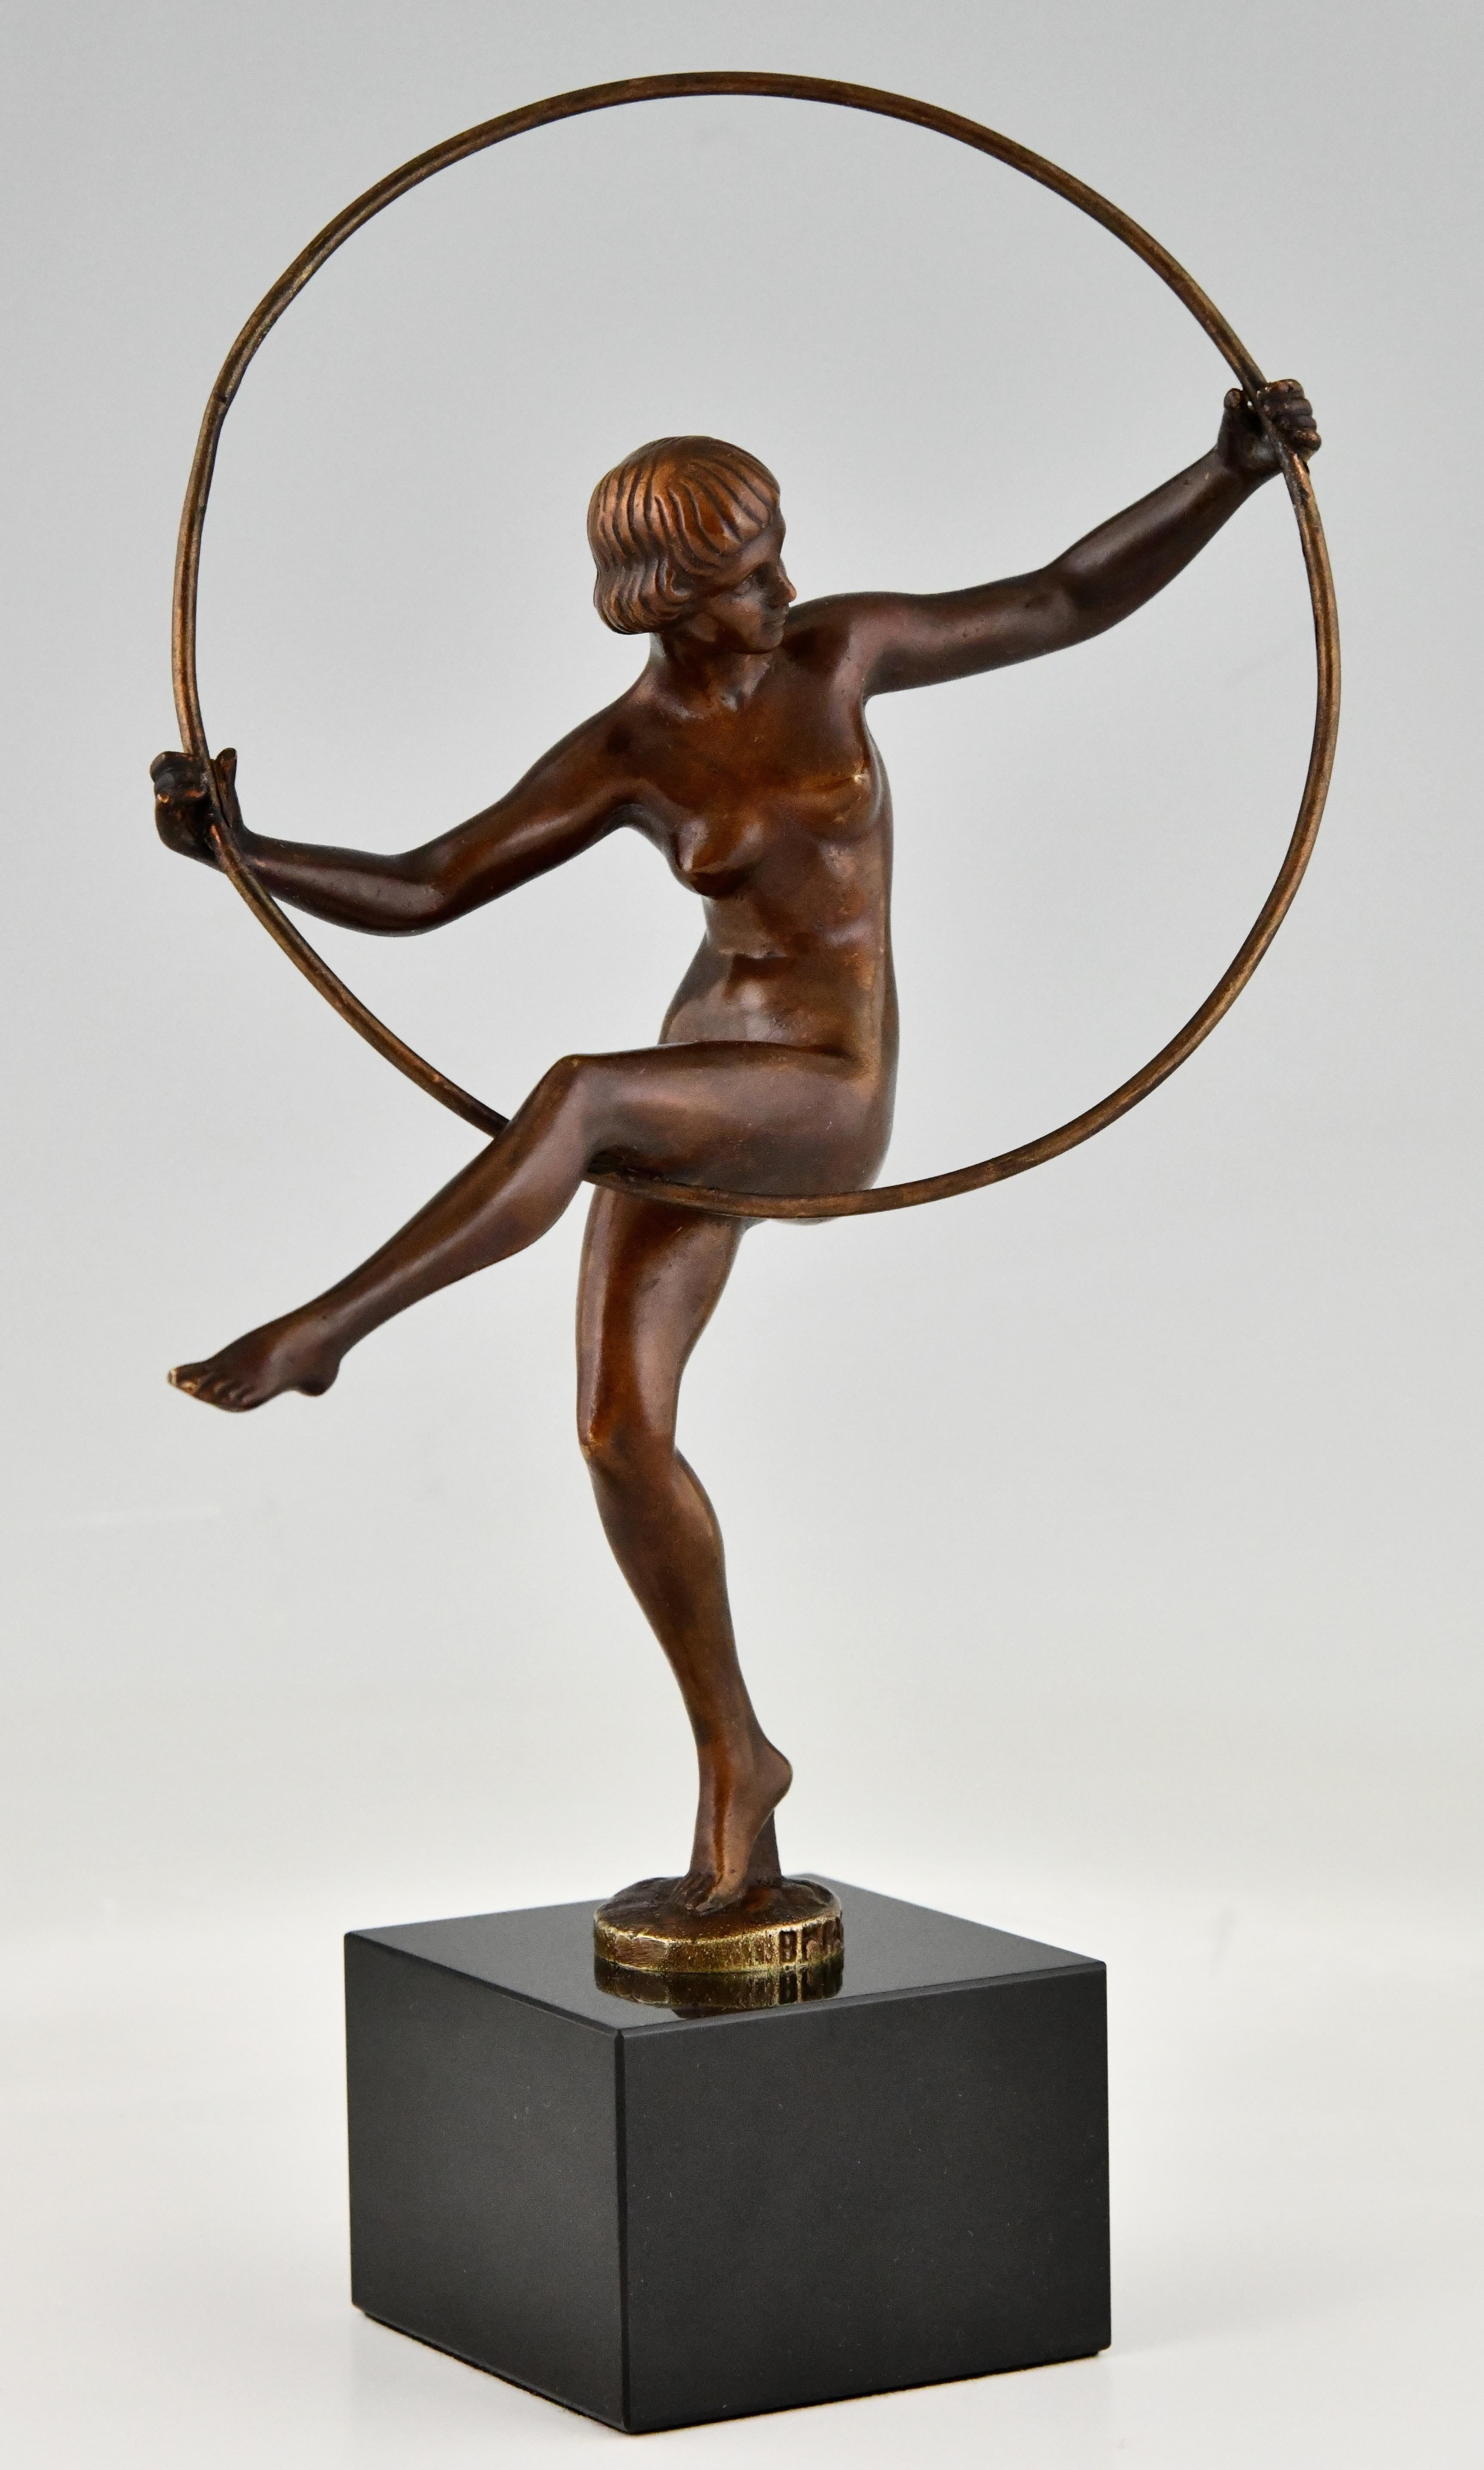 Art Deco bronze sculpture nude hoop dancer signed by Briand, the pseudonym of Marcel Bouraine. Bronze with brown patina on Belgian Black marble base. France 1930.